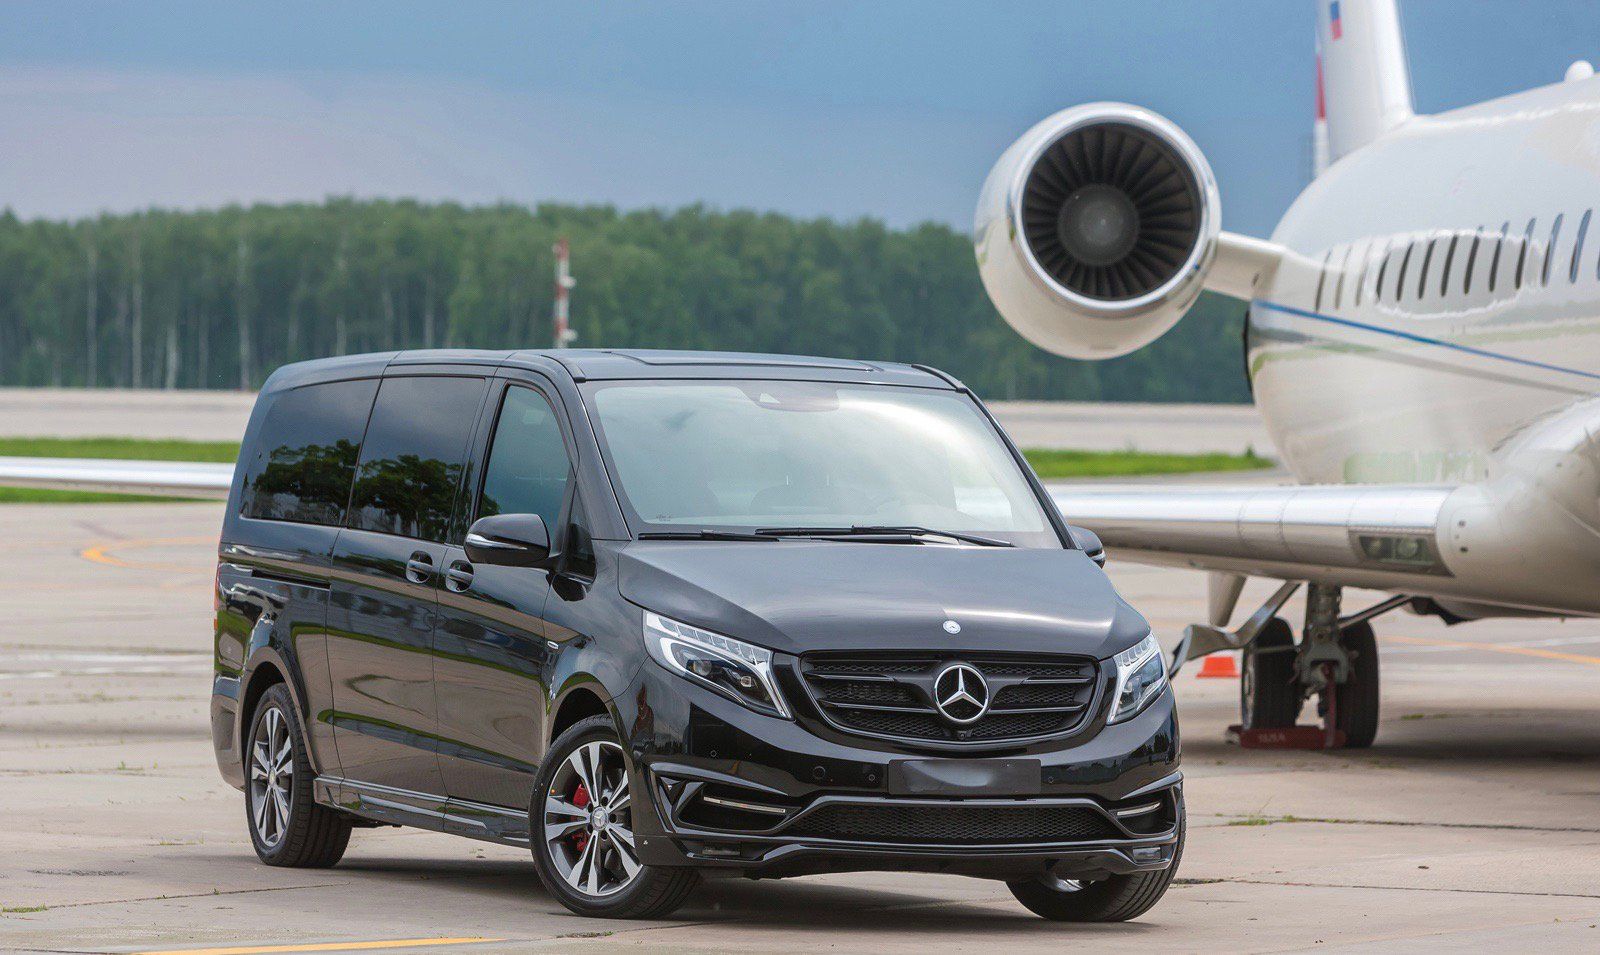 Luxury V class | Executive Drivers | VIP Airport Service